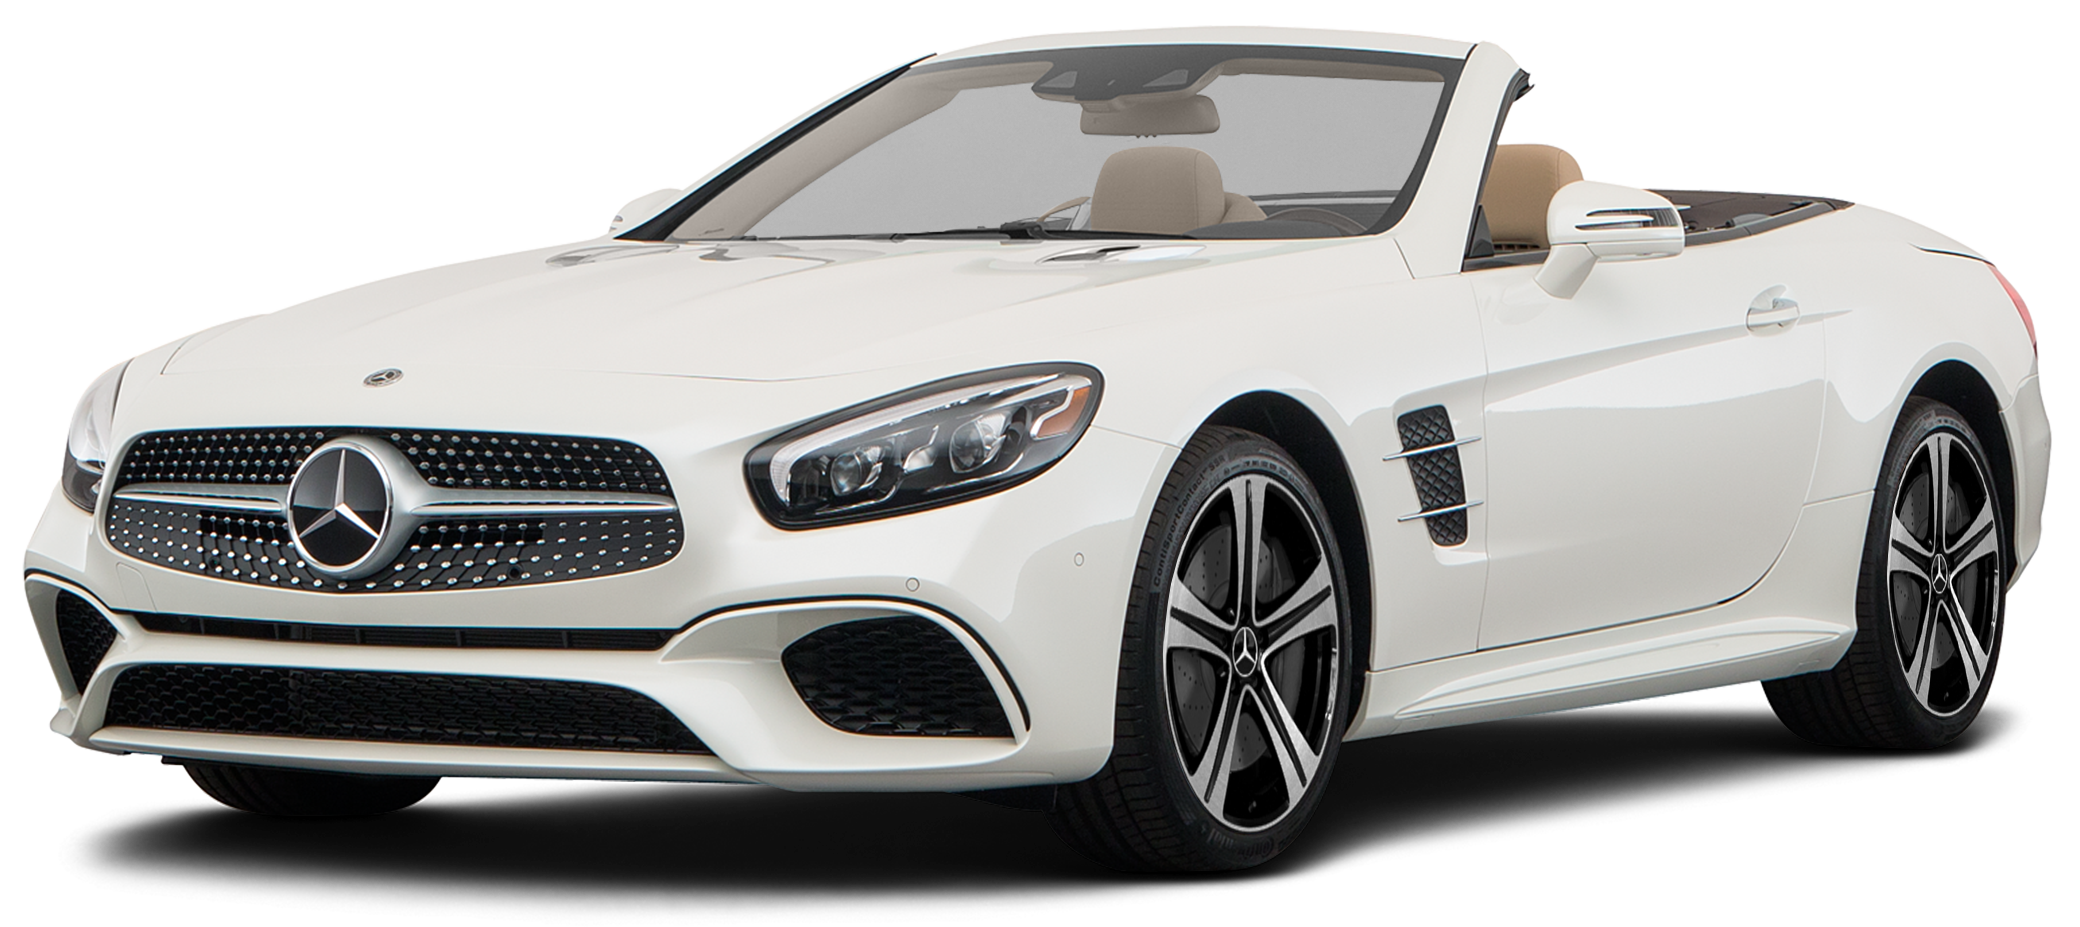 2020 Mercedes-Benz SL 450 Incentives, Specials & Offers in Owings Mills MD